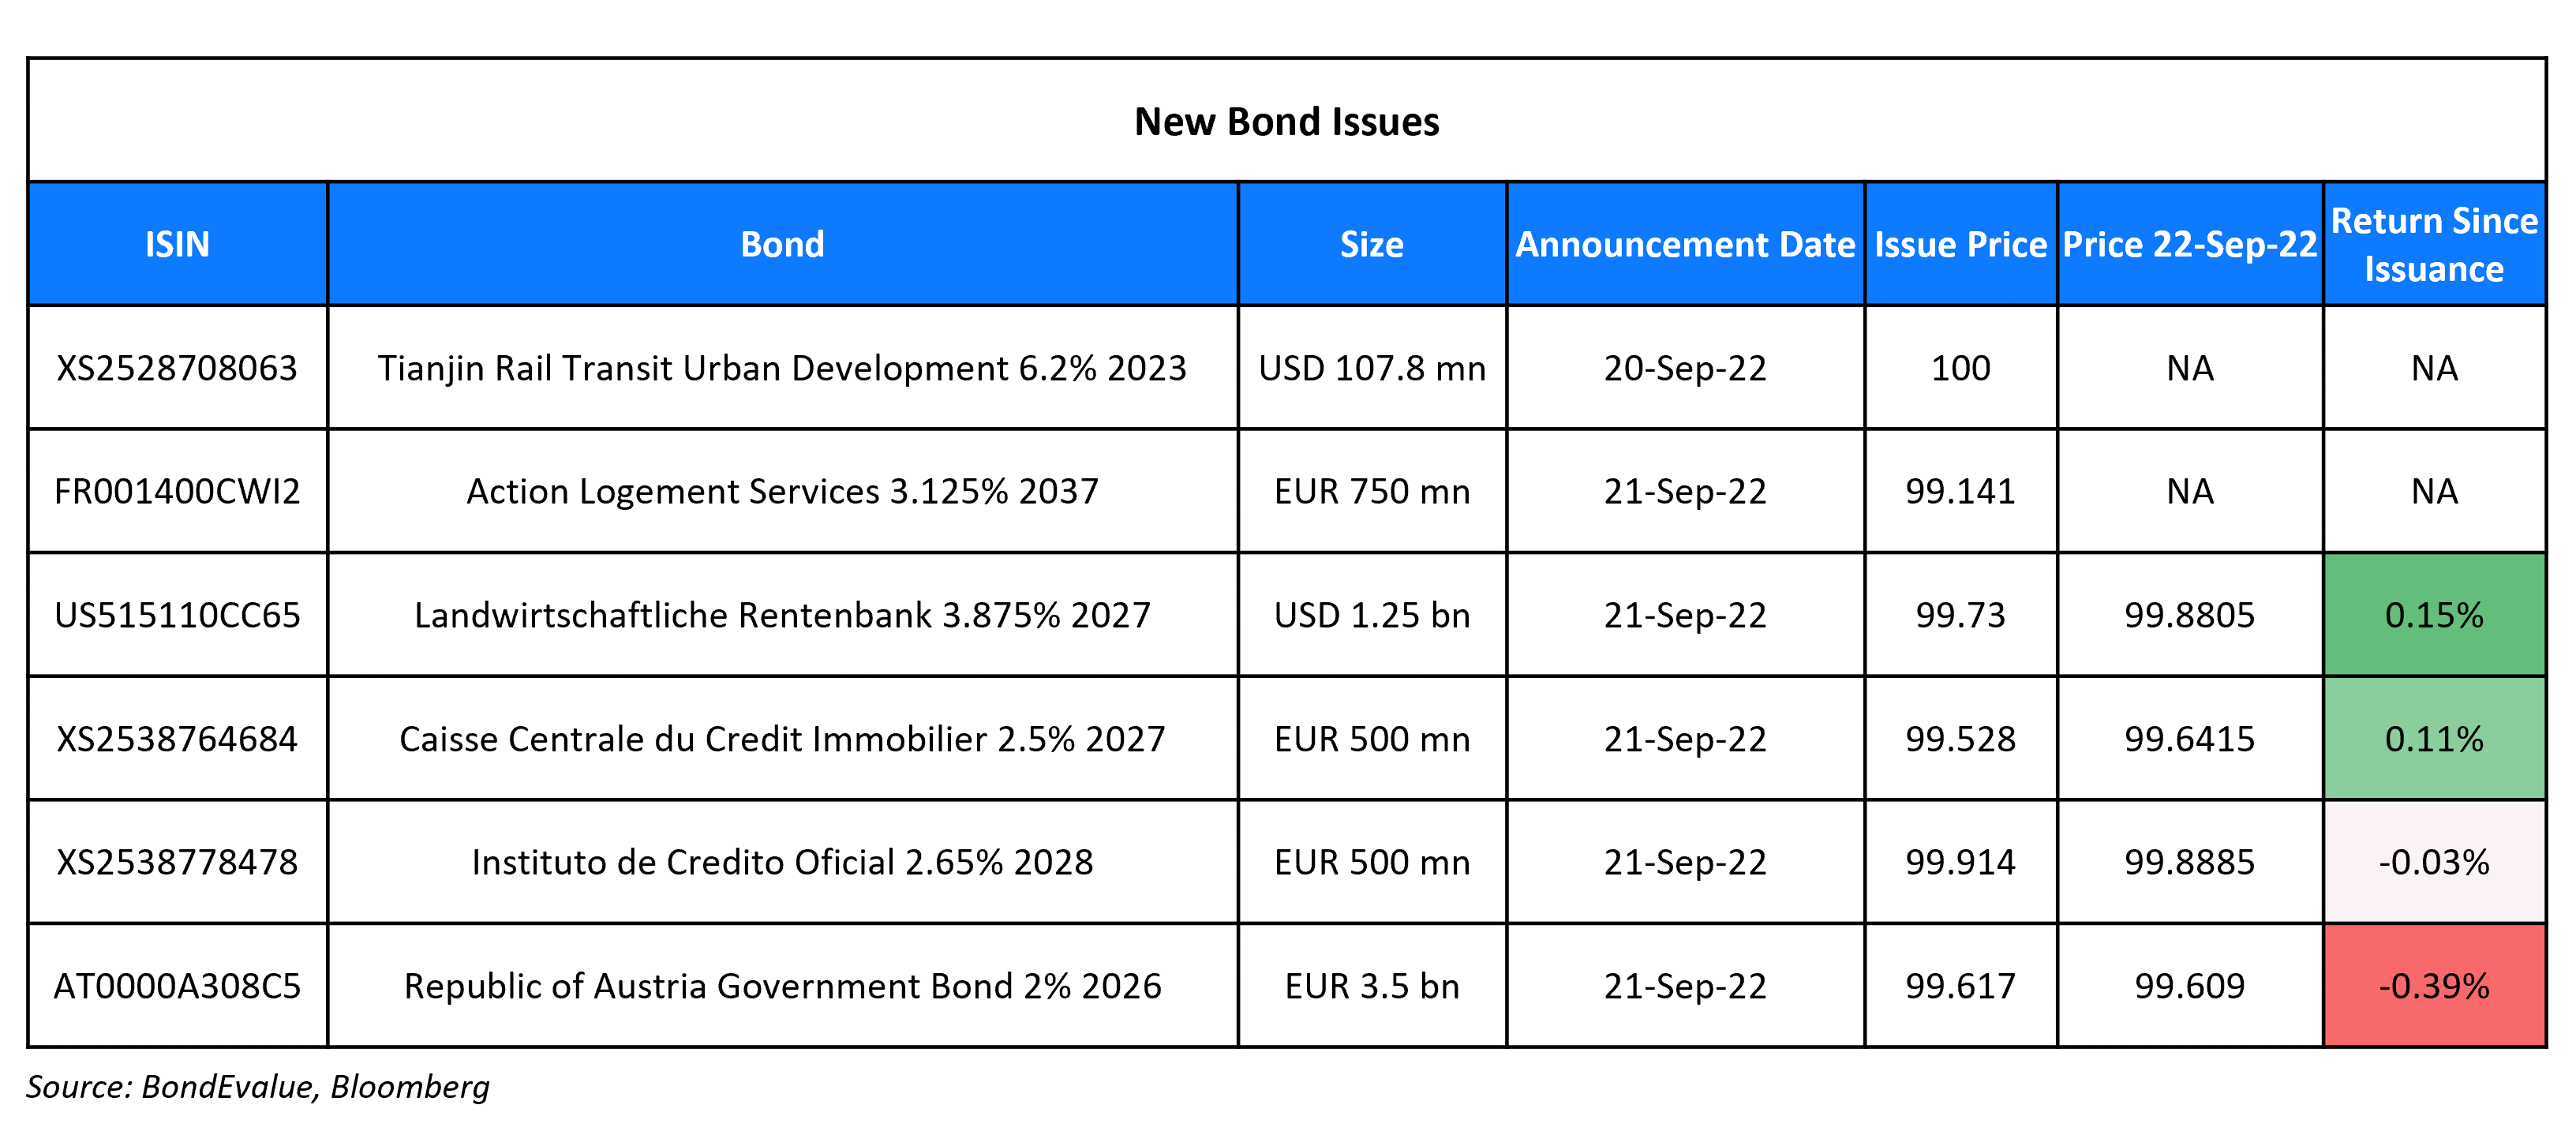 New Bond Issues 22 Sep 22